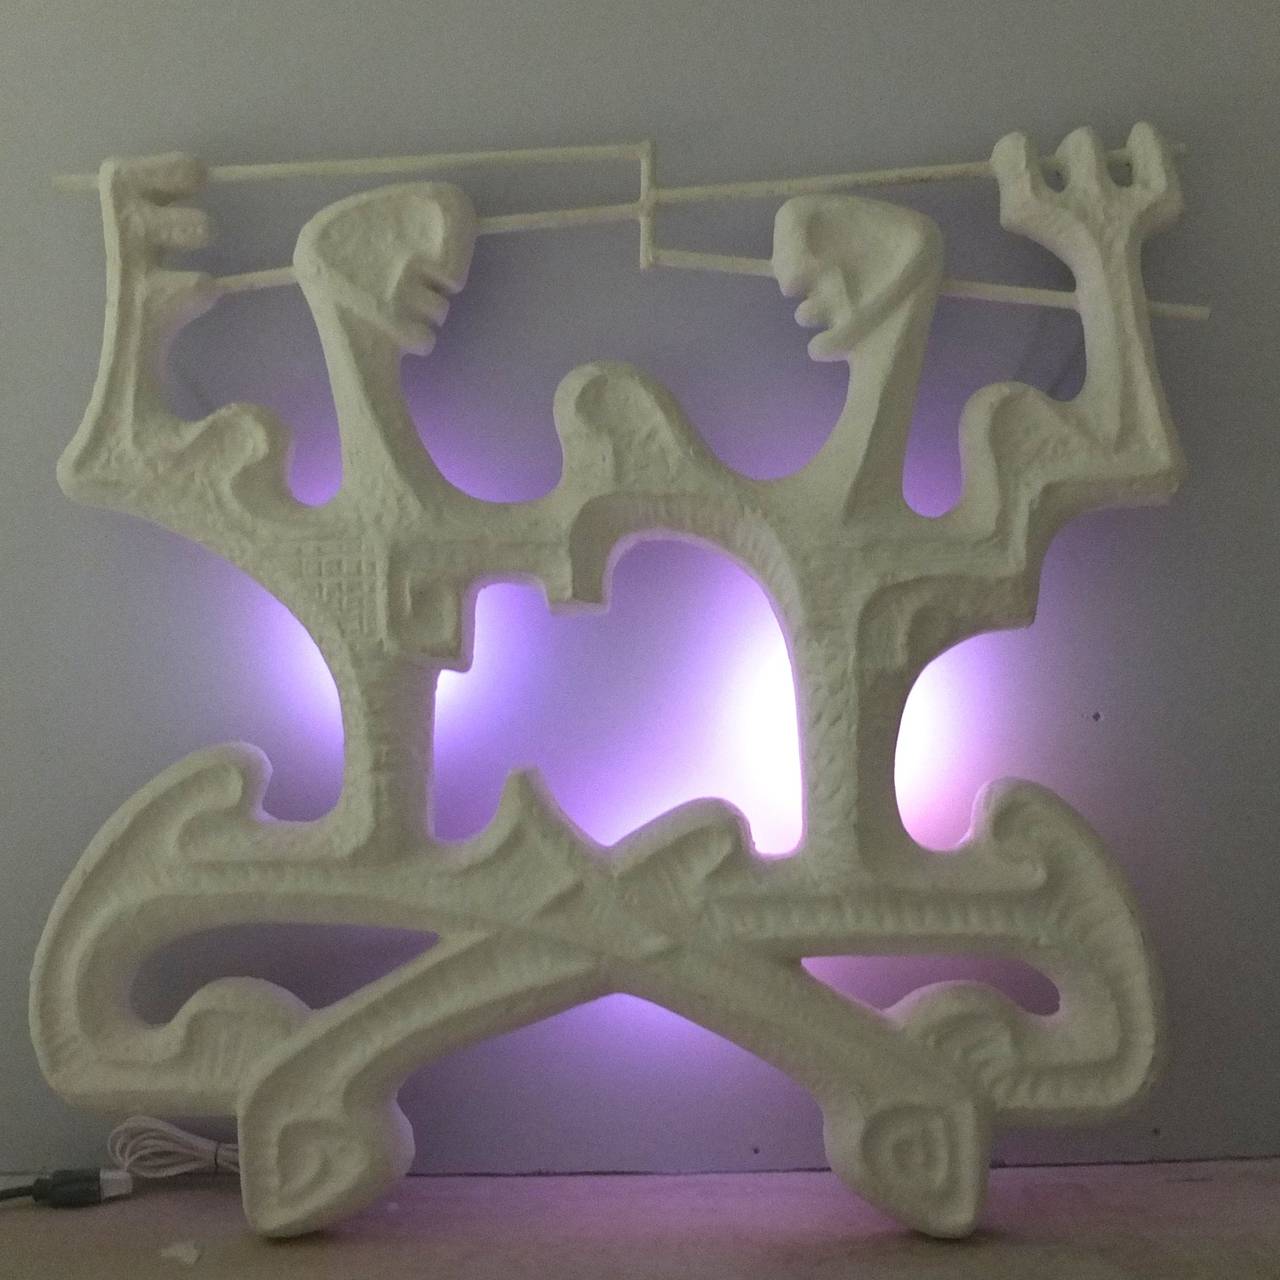 Mid-Century Modern Rare Backlit Gemini Wall Sculpture by Frederic Weinberg